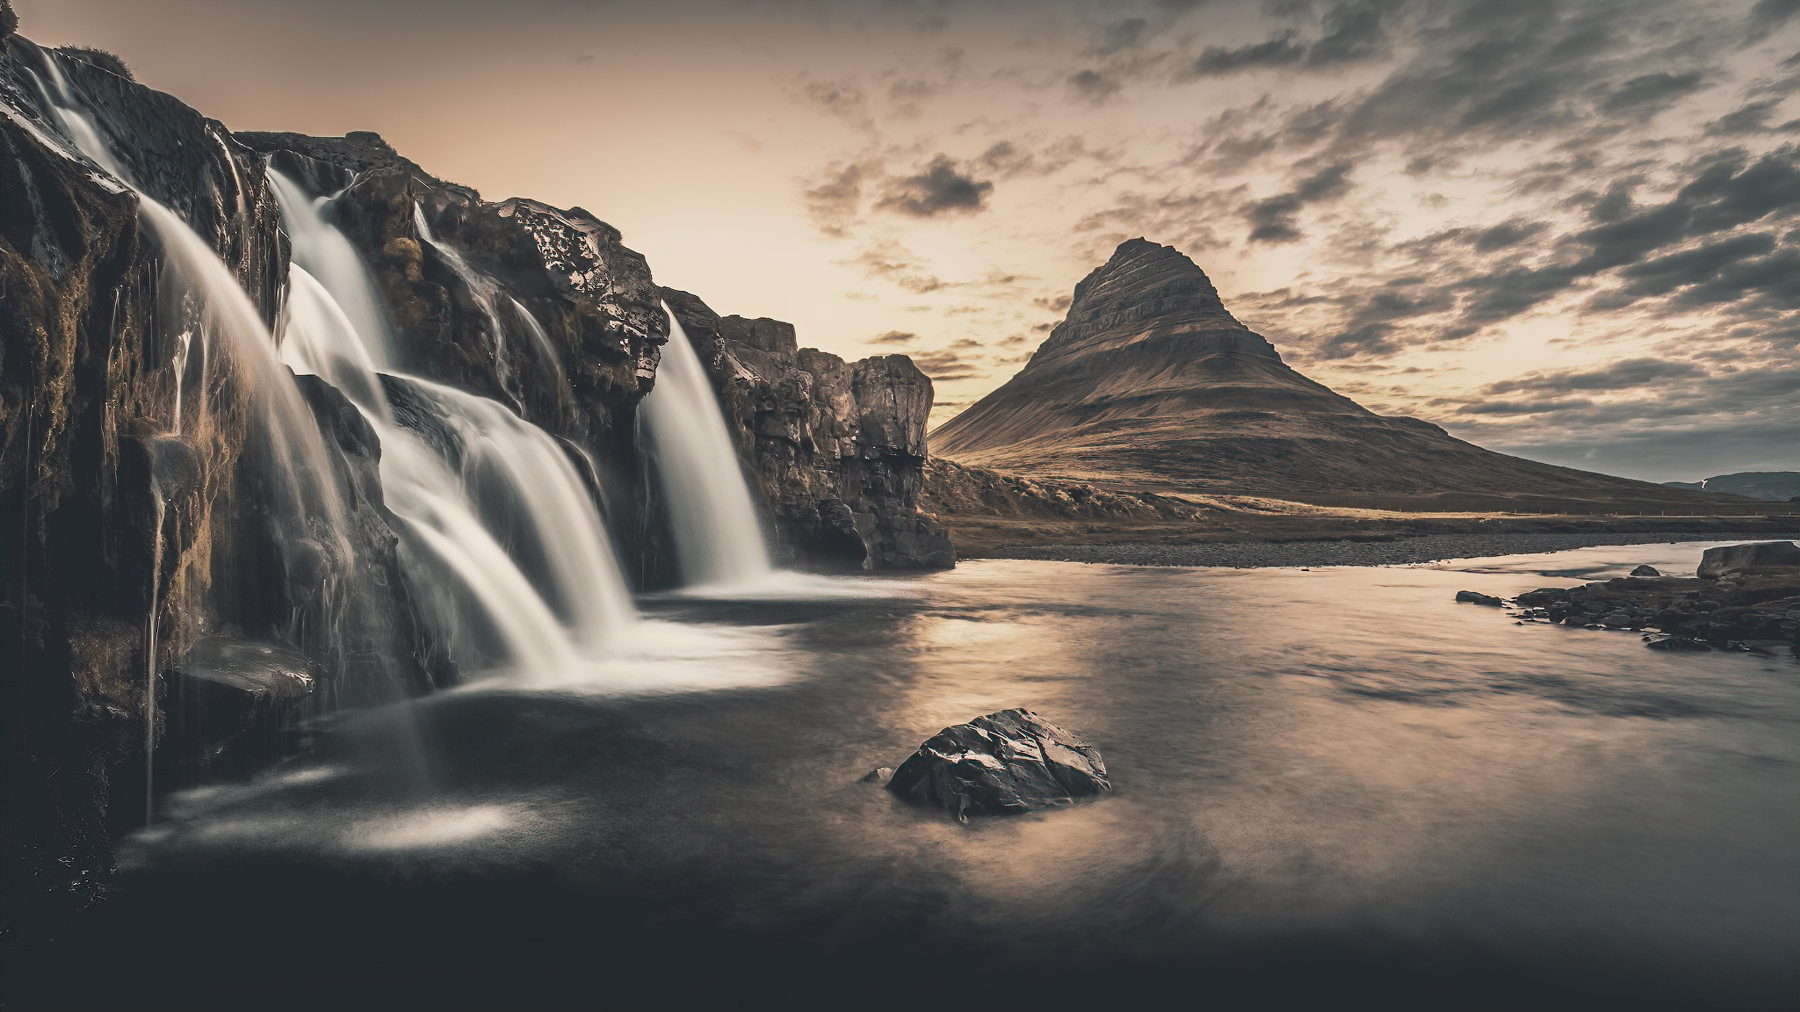 General 1800x1012 water waterfall mountains sky clouds waterscape landscape photography outdoors nature Ruslan Stepanov rocks cliff Iceland